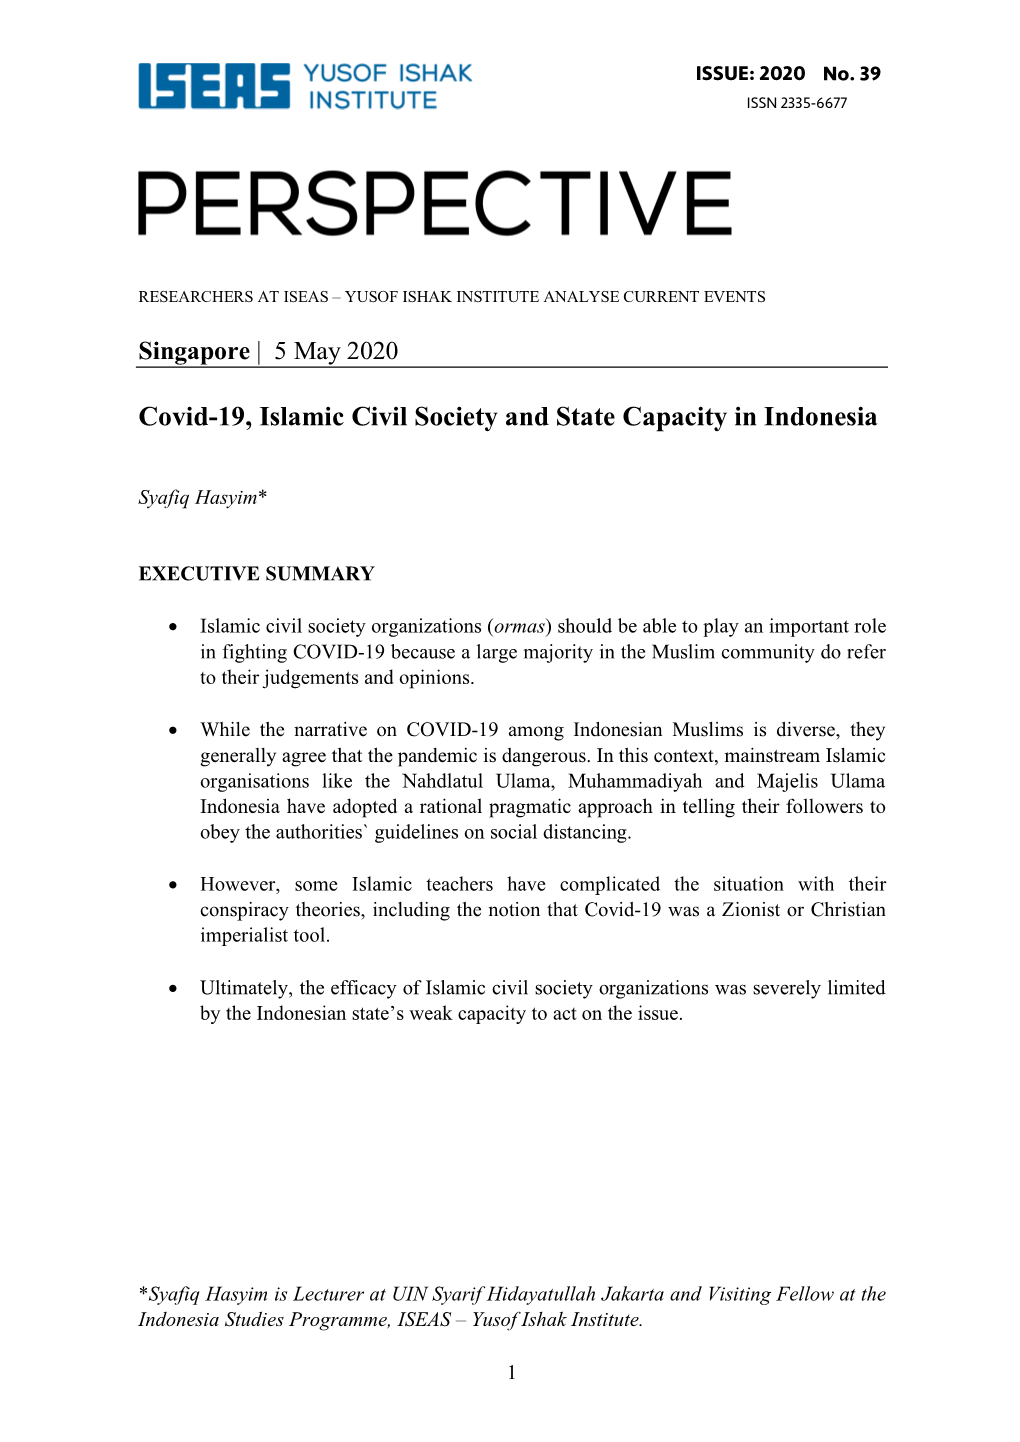 Covid-19, Islamic Civil Society and State Capacity in Indonesia